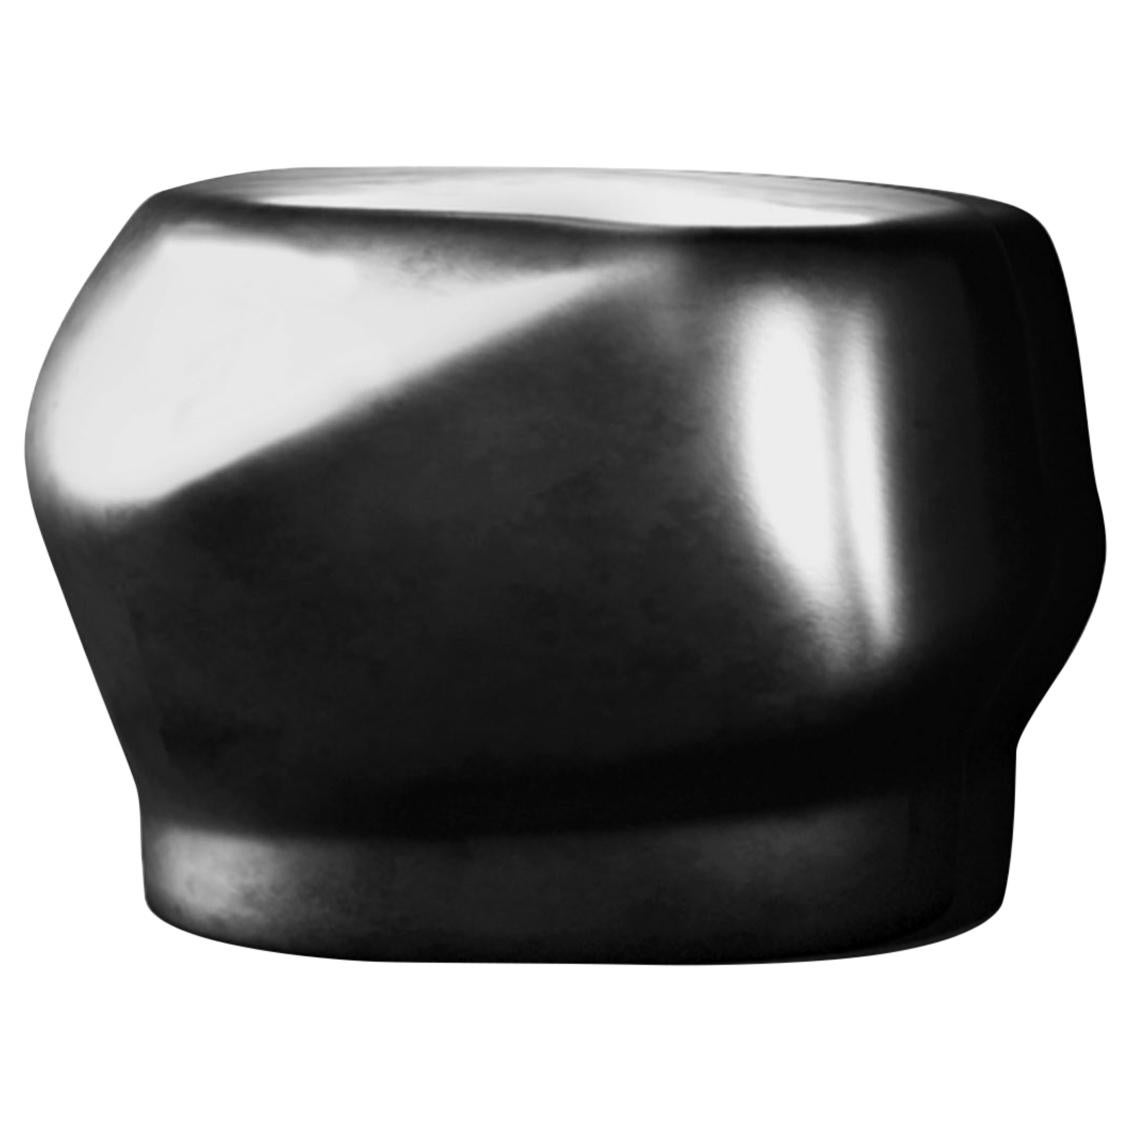 Roc Foot Stool by LK Edition